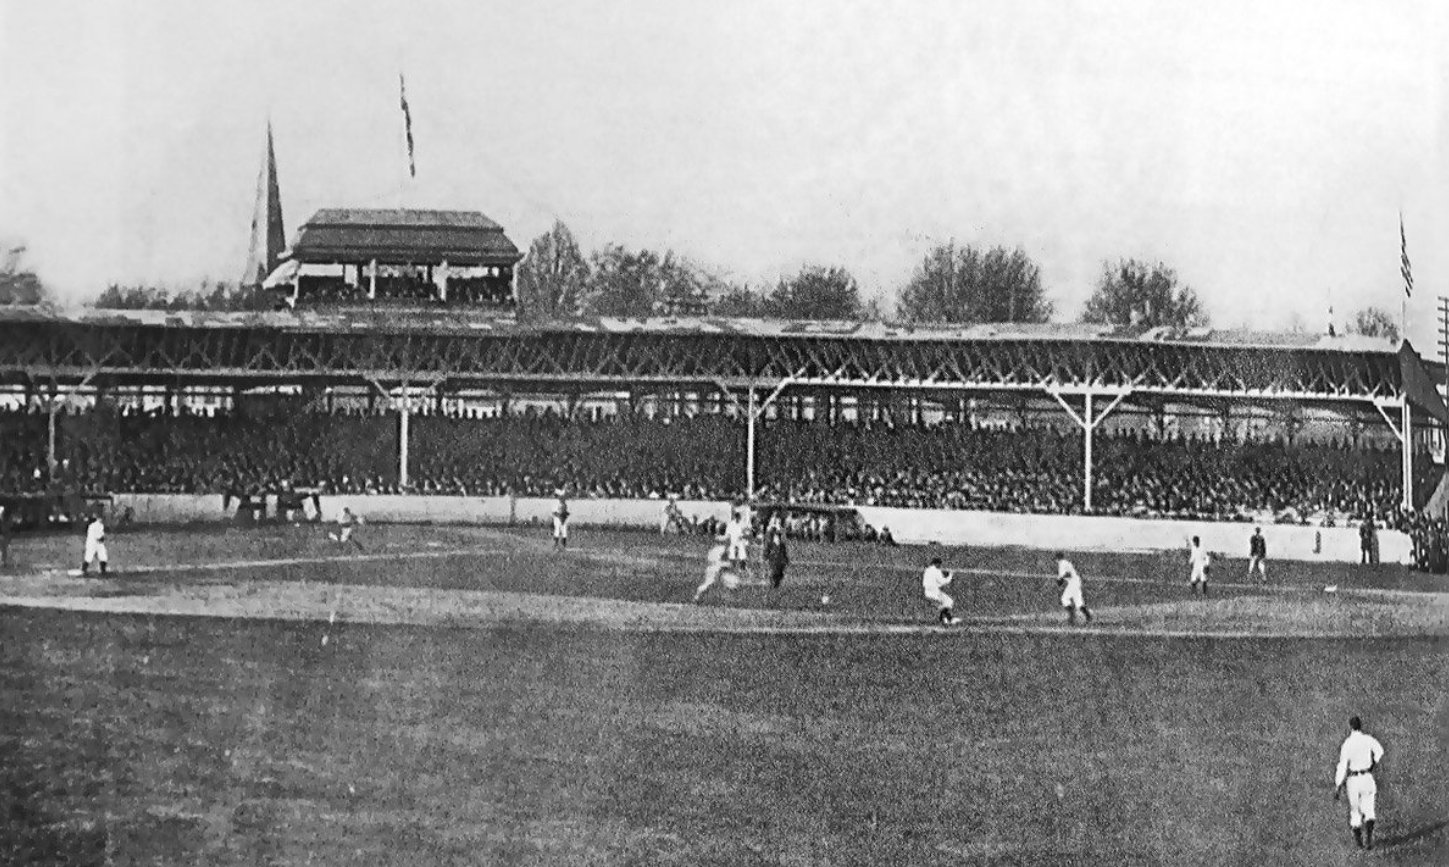 Union Park, Baltimore, May 11, 1891 - Over 10,000 see the first game at Orioles new ballpark  against the St Louis Browns . The Orioles would take the contest by 8-4 score aided by five runs in the first two innings and 10 errors by the Browns fielders https://t.co/lNRrYKdybA